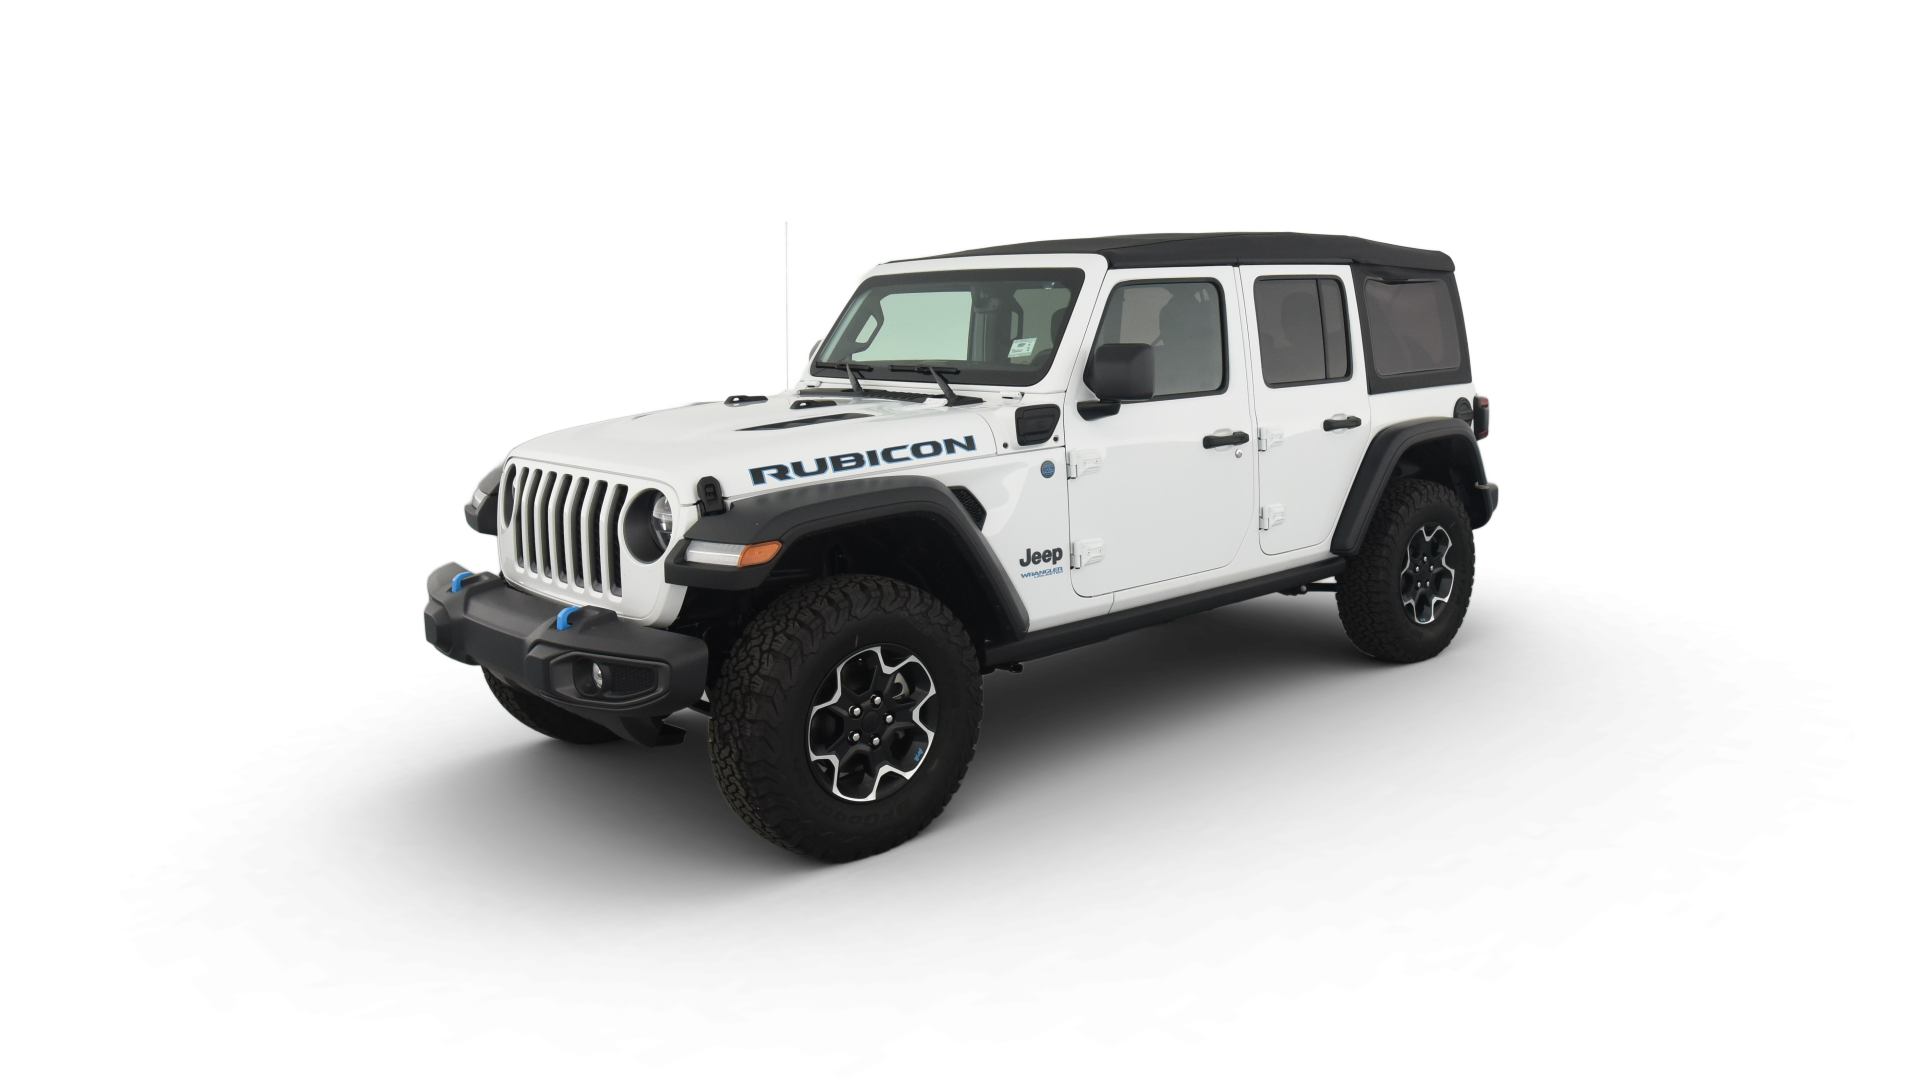 Jeep Wrangler Unlimited 4xe model image.